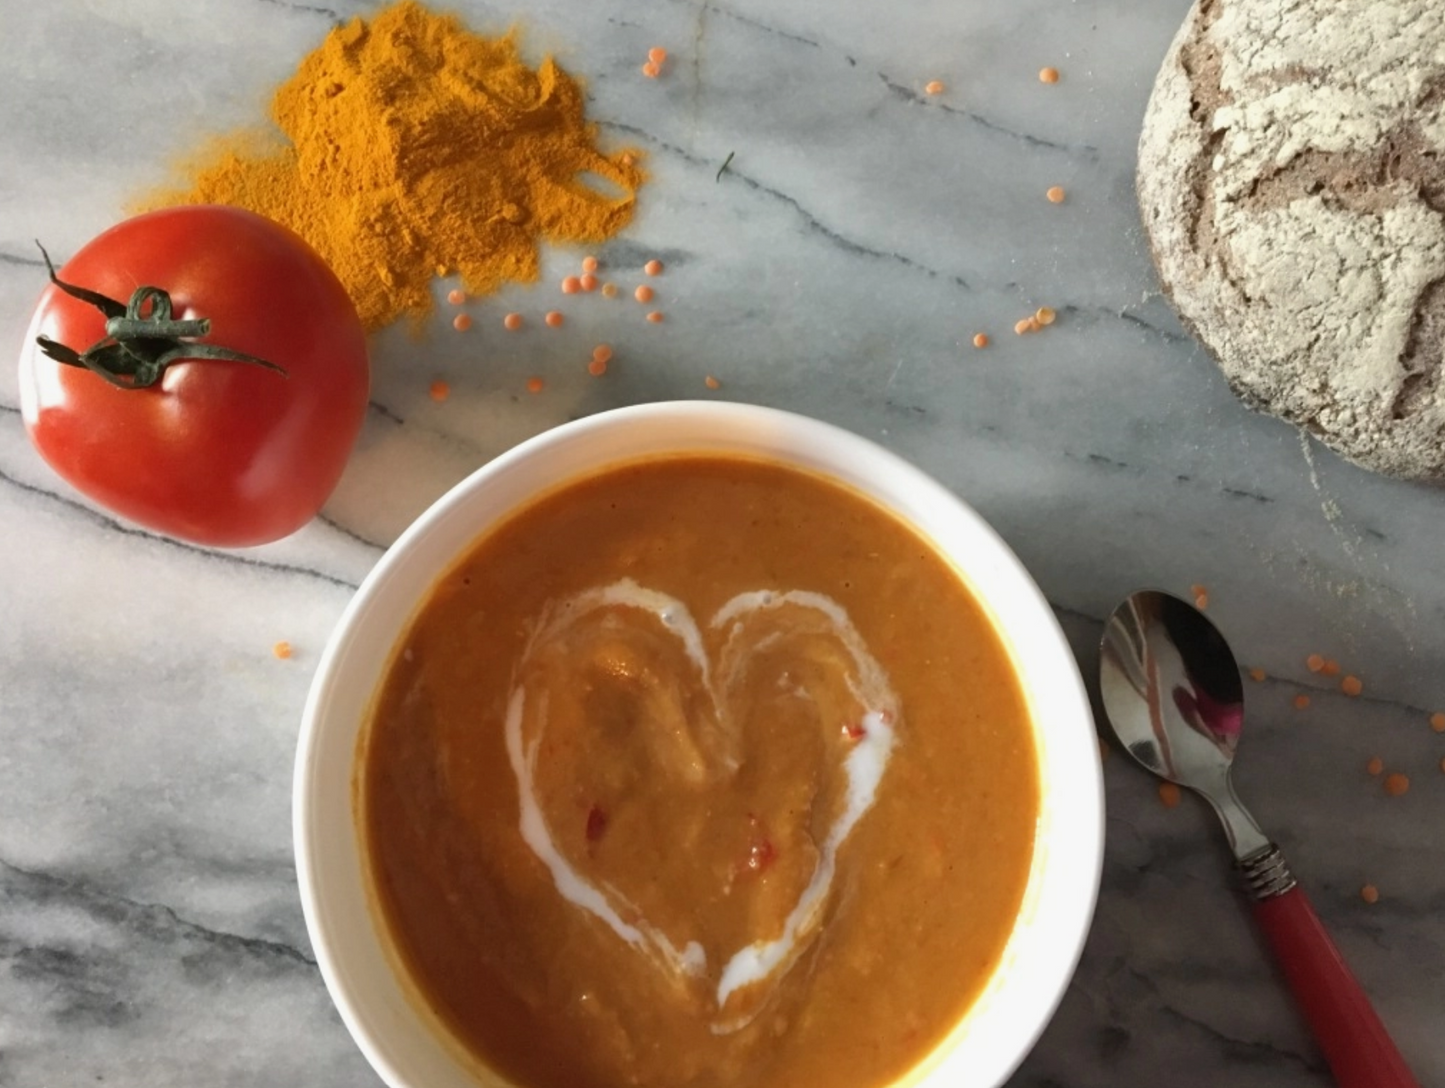 Healthy Gourmet Kitchen - Moroccan Red Lentil Dry Soup Mix